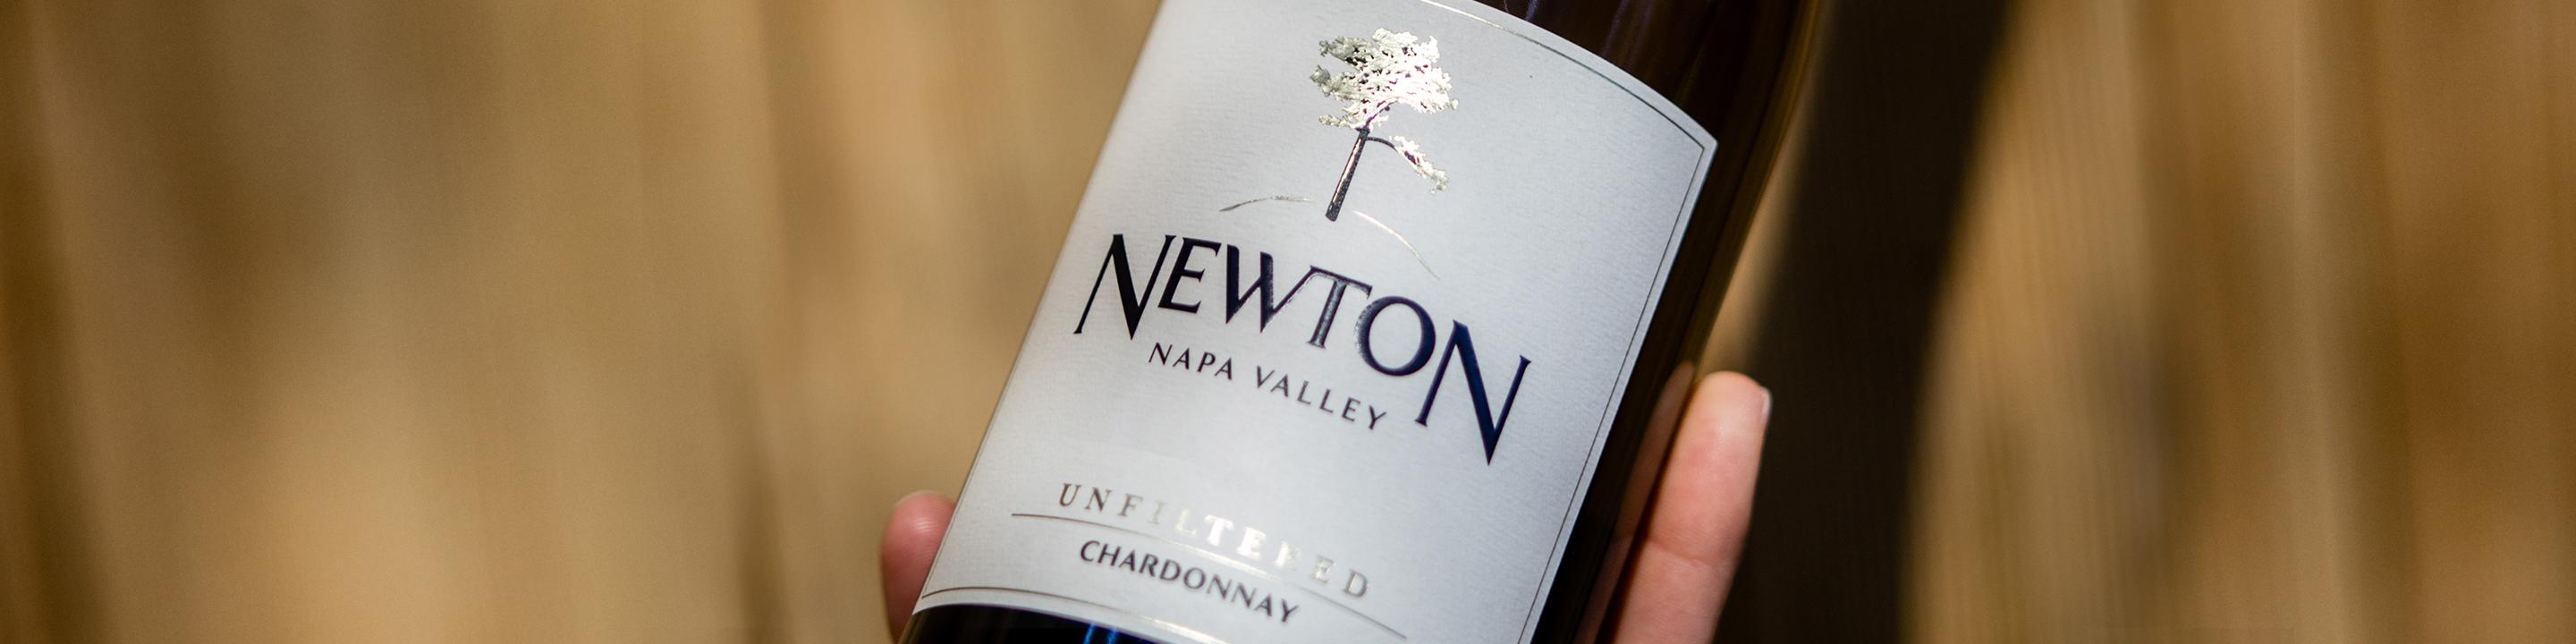 Newton is part of the prestige tier in the Estates & Wines portfolio. Made  up of Unfiltered, Puzzle and Single Vineyard. A California wine that produces Chardonnay as well as Cabernet Sauvignon  from prestigious appellations such as Spring Mountain, Yountville and Mt. Veeder. 